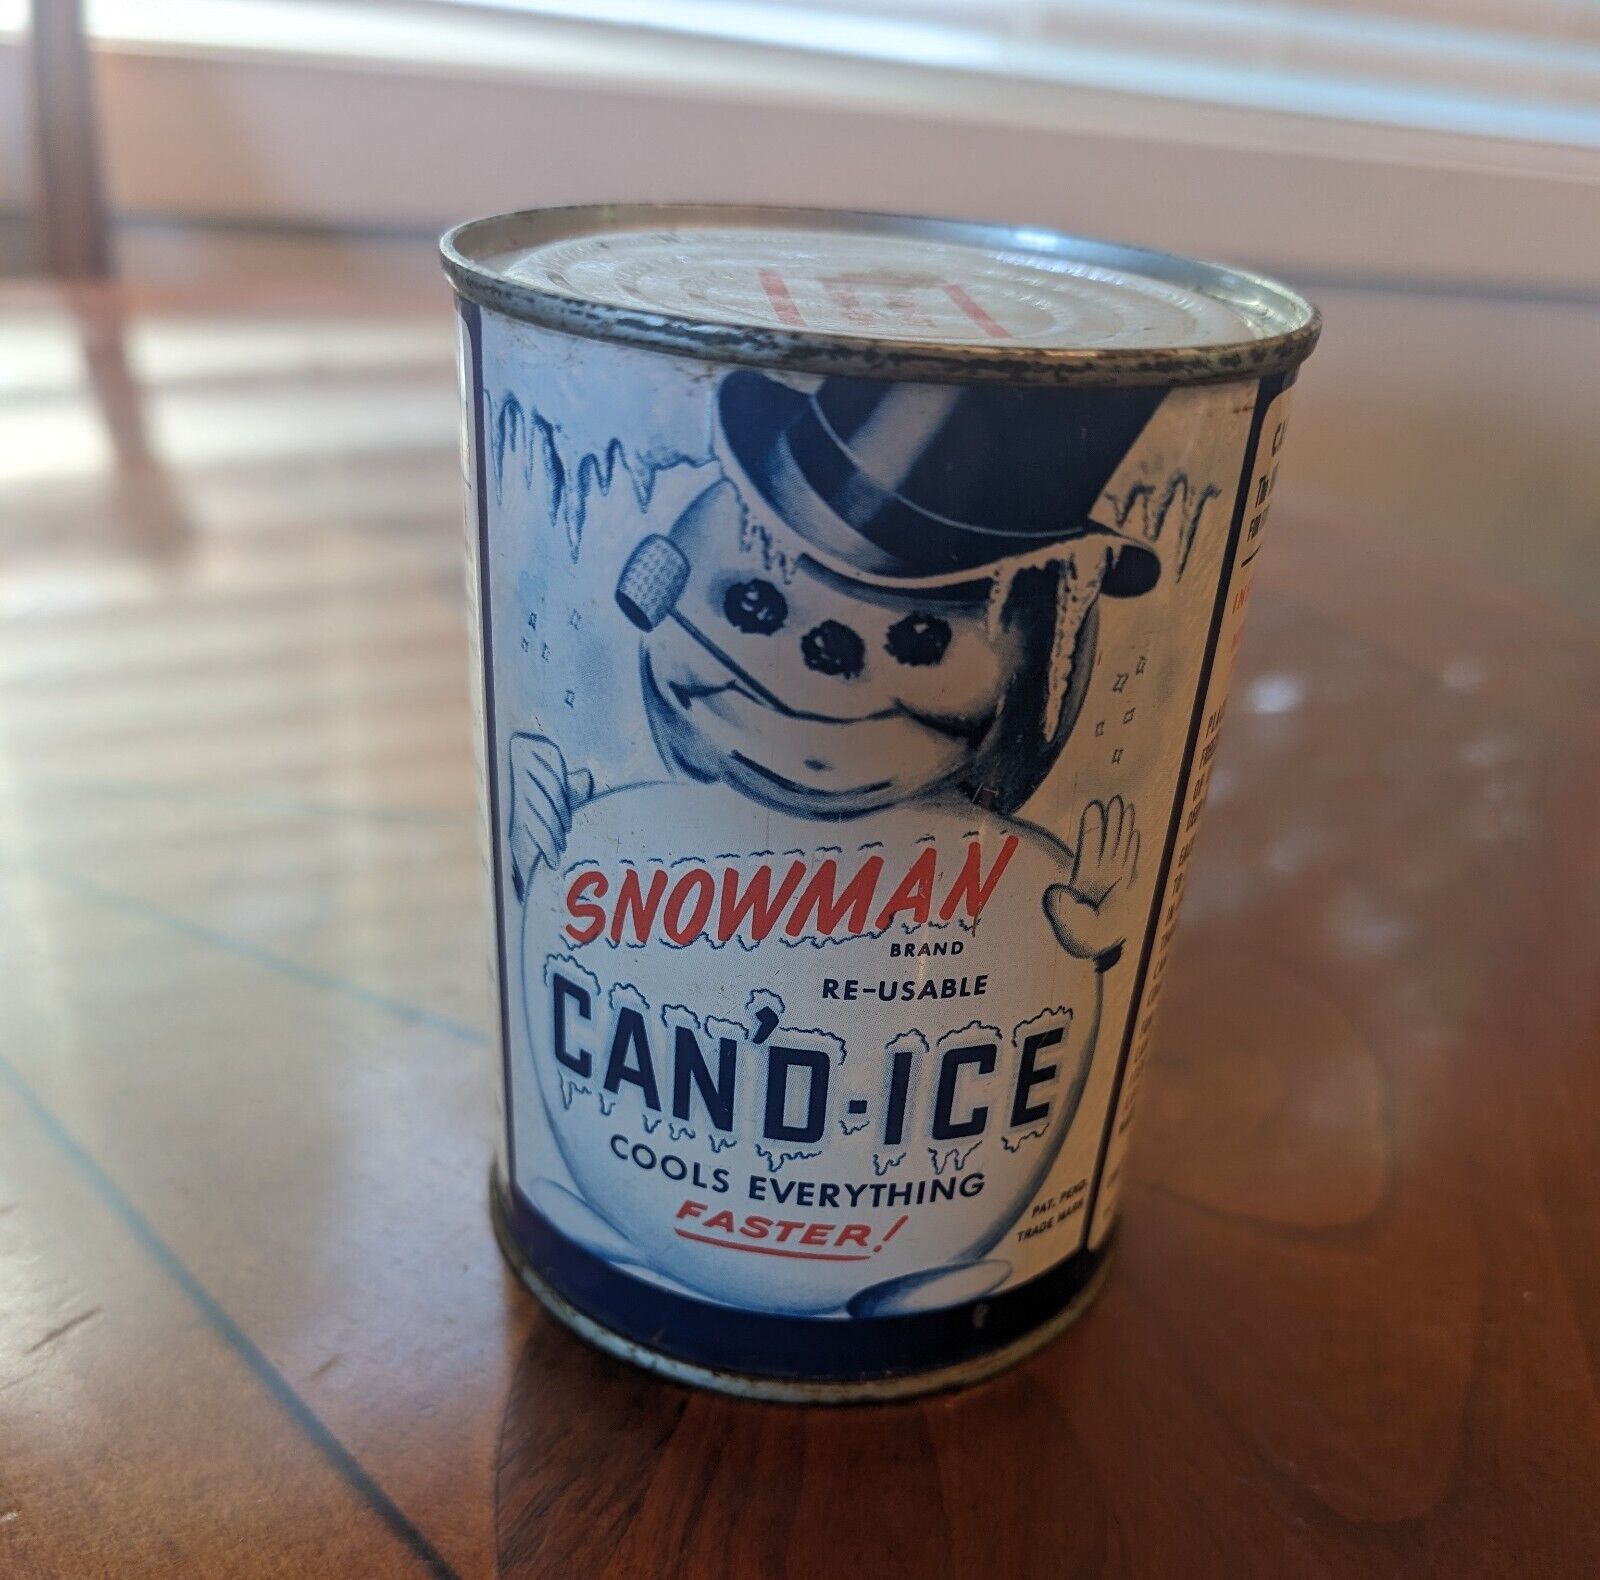 Snowman Cand Ice full metal can 